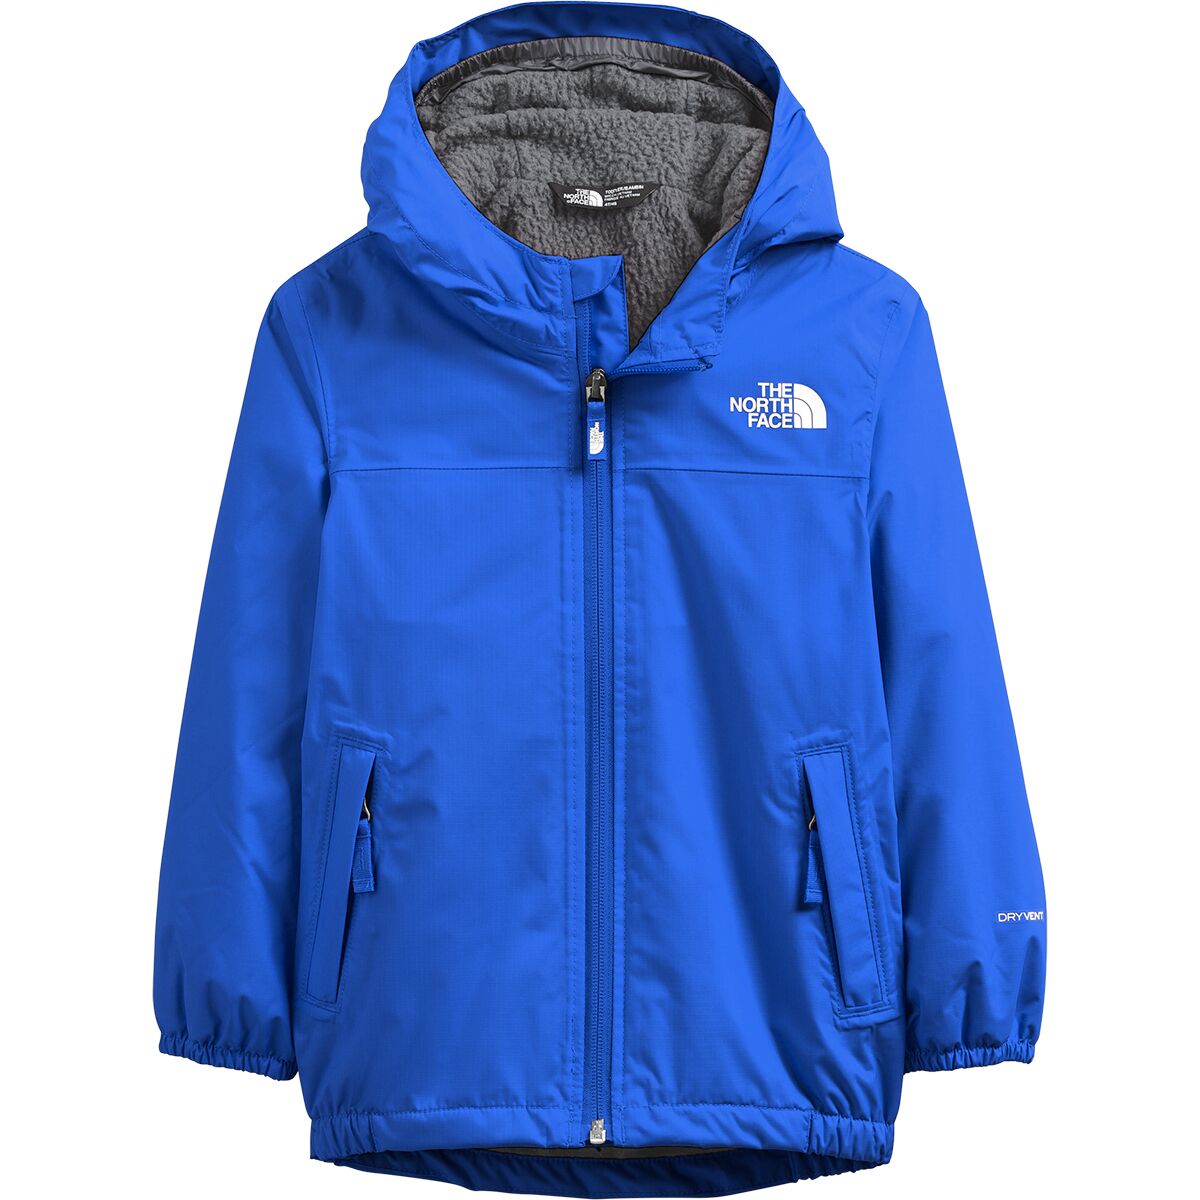 The North Face Warm Storm Jacket - Toddler Boys'